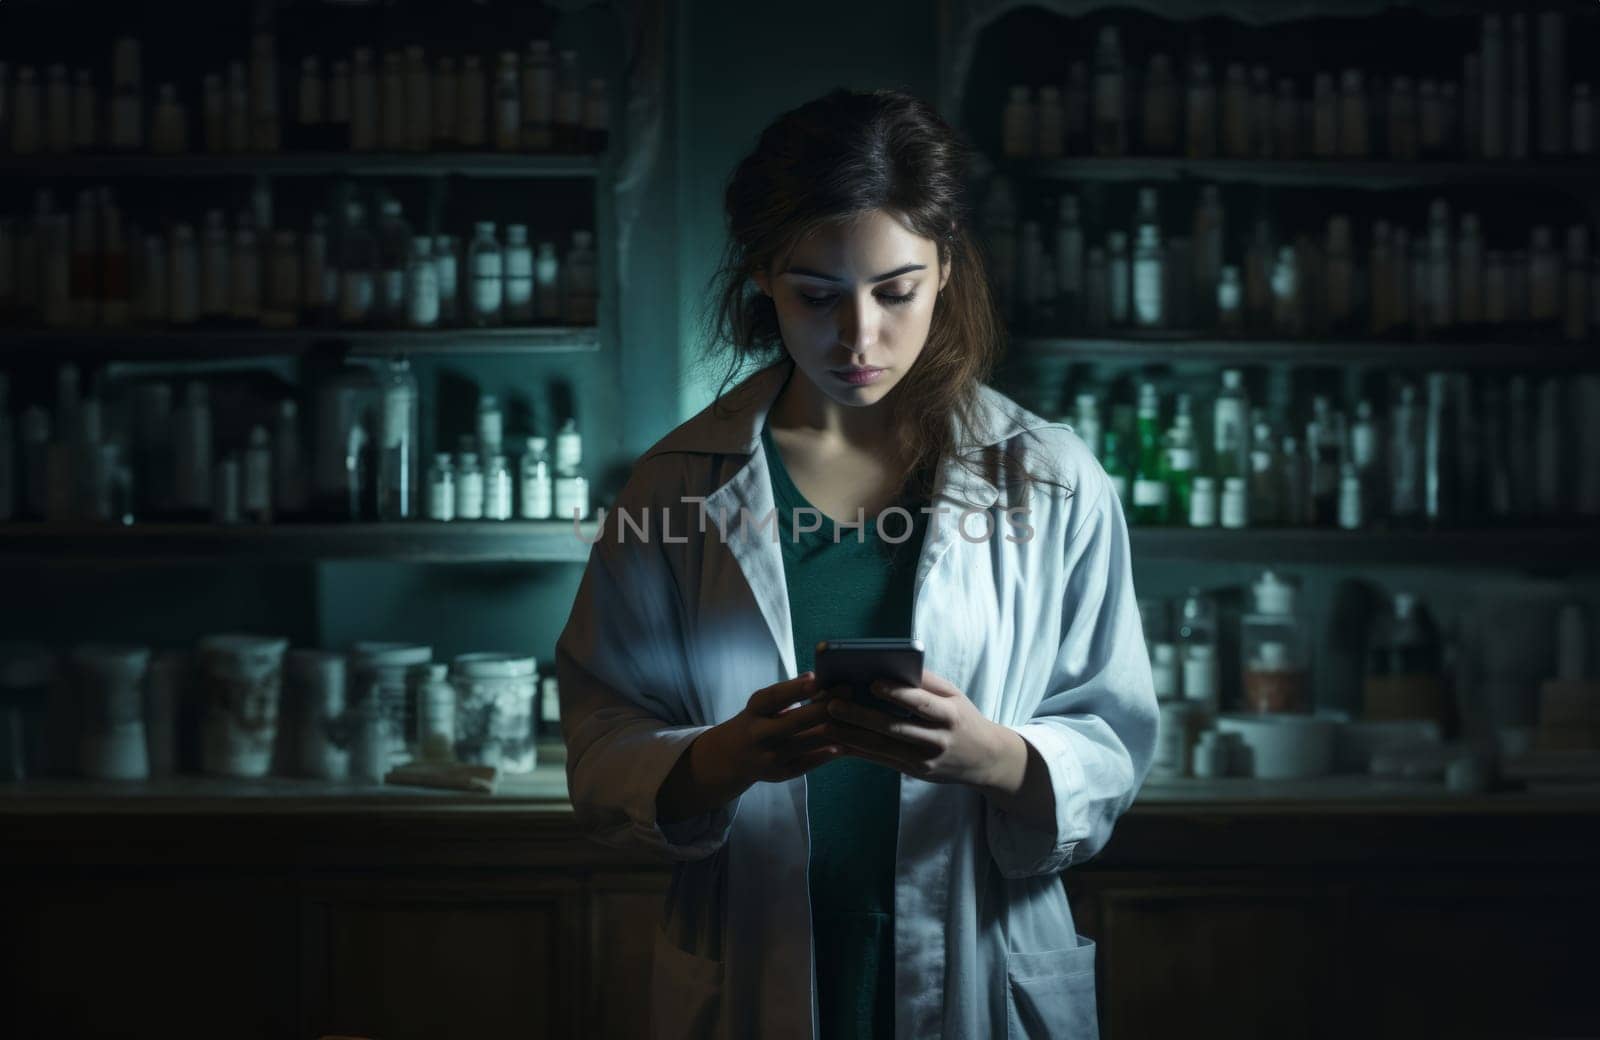 A glimpse into the future of healthcare: a doctor uses a smartphone to check medication inventory in a pharmacy.